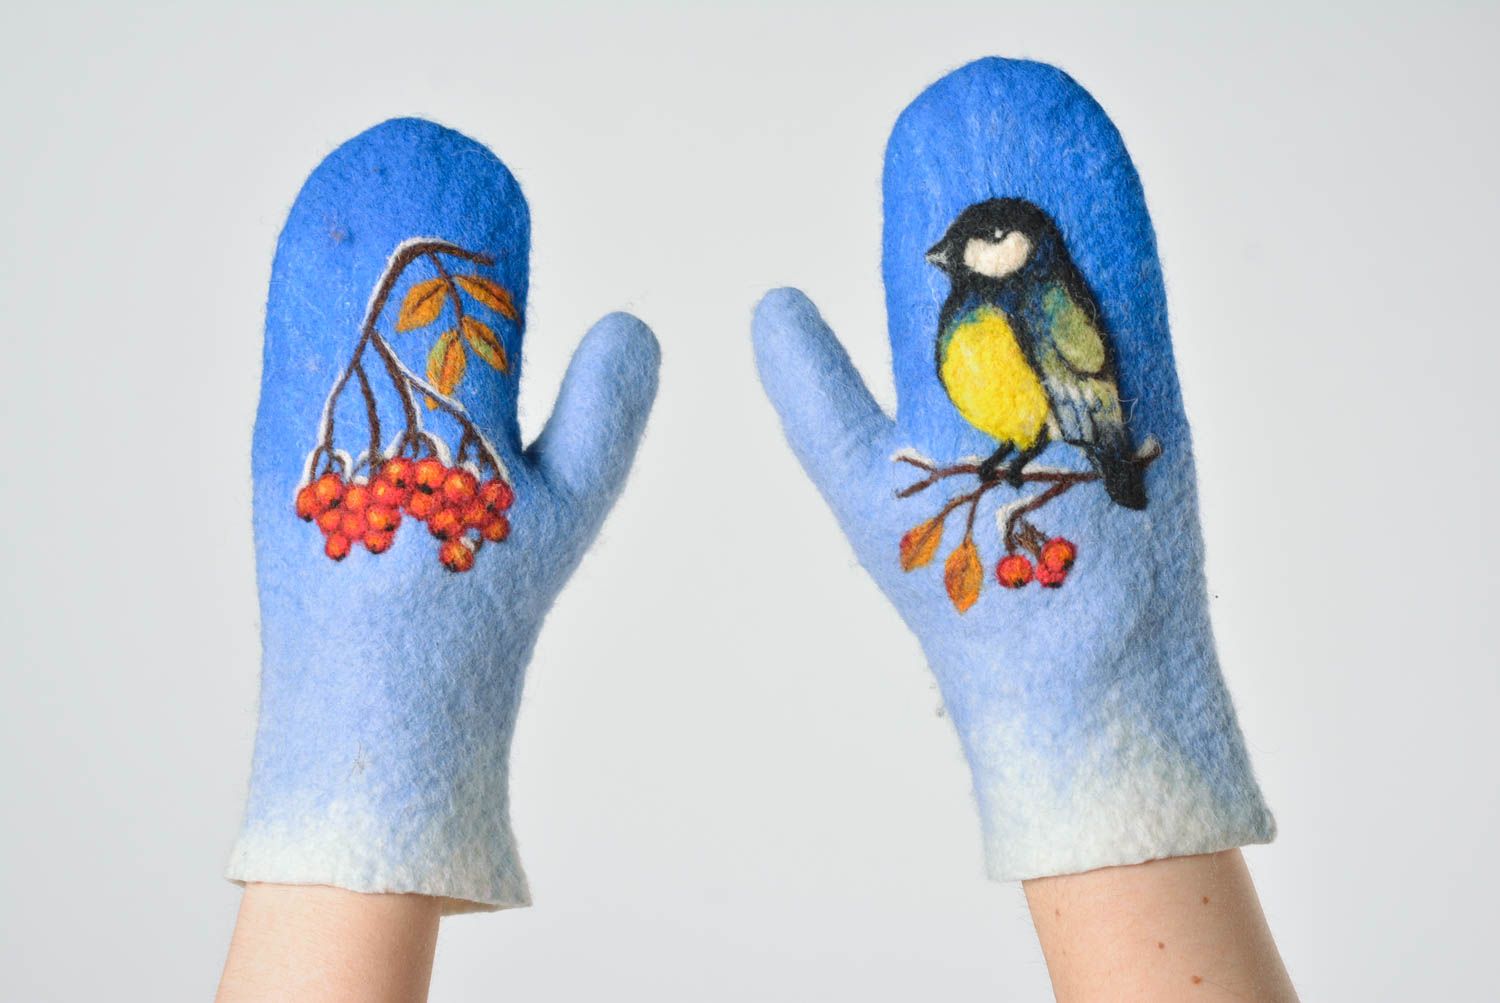 Handmade felted mittens wool knit mittens wool mittens mittens with a bird image photo 1